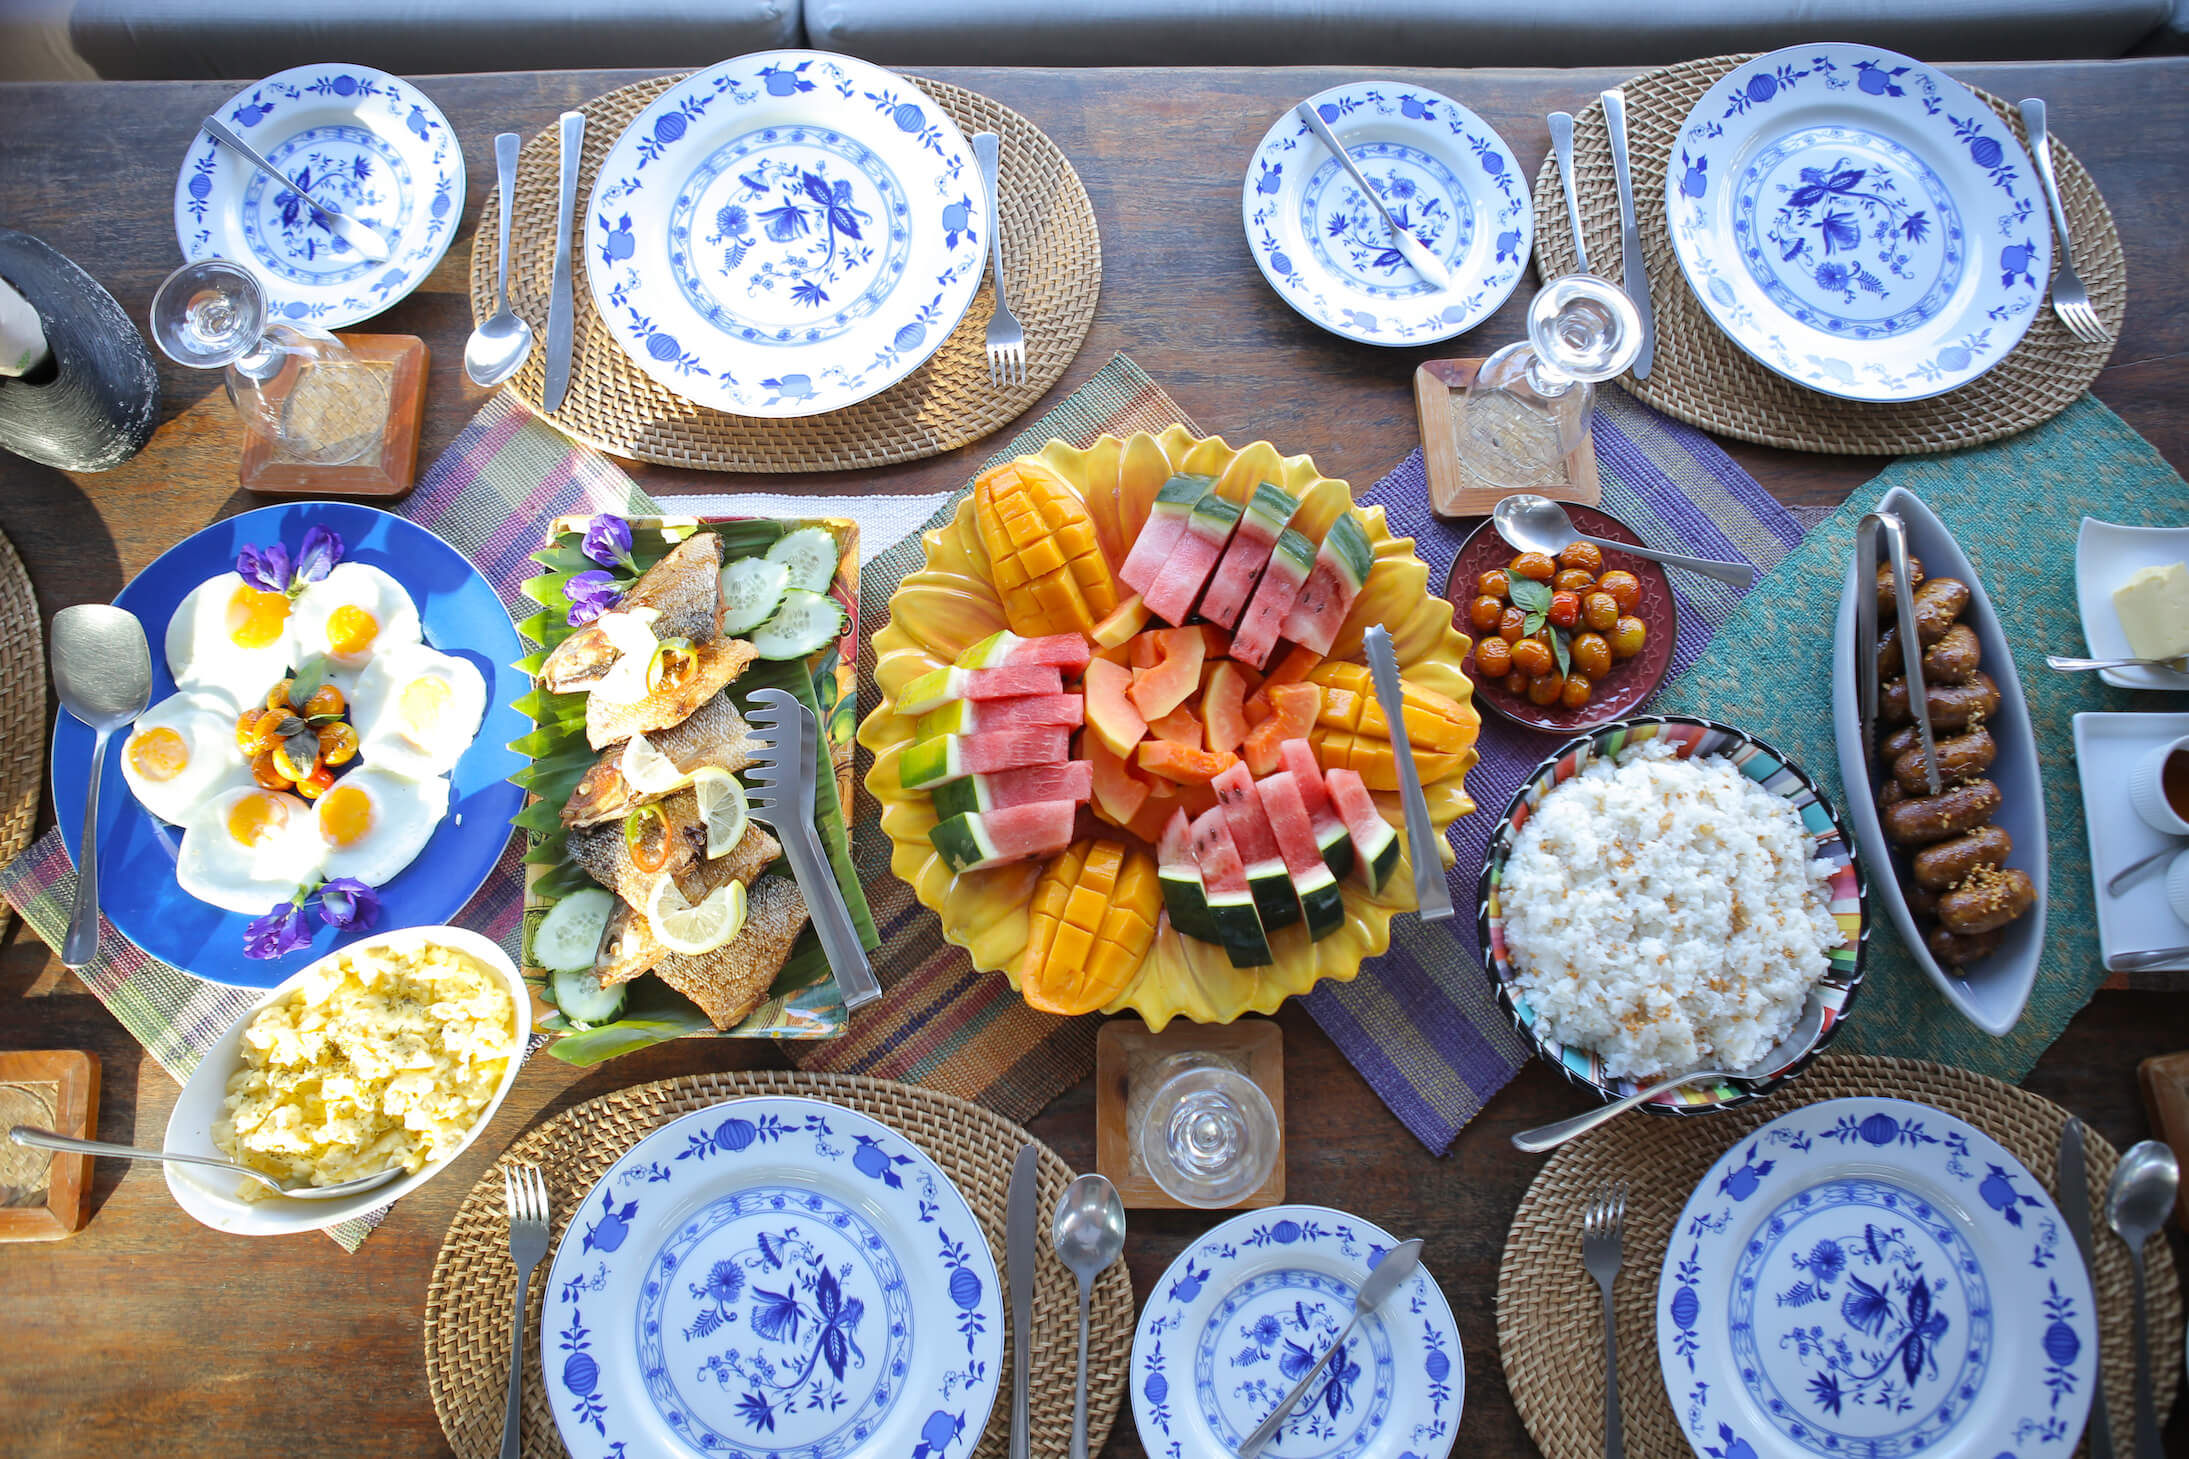 A table set with blue and white plates with food arranged in the middle.